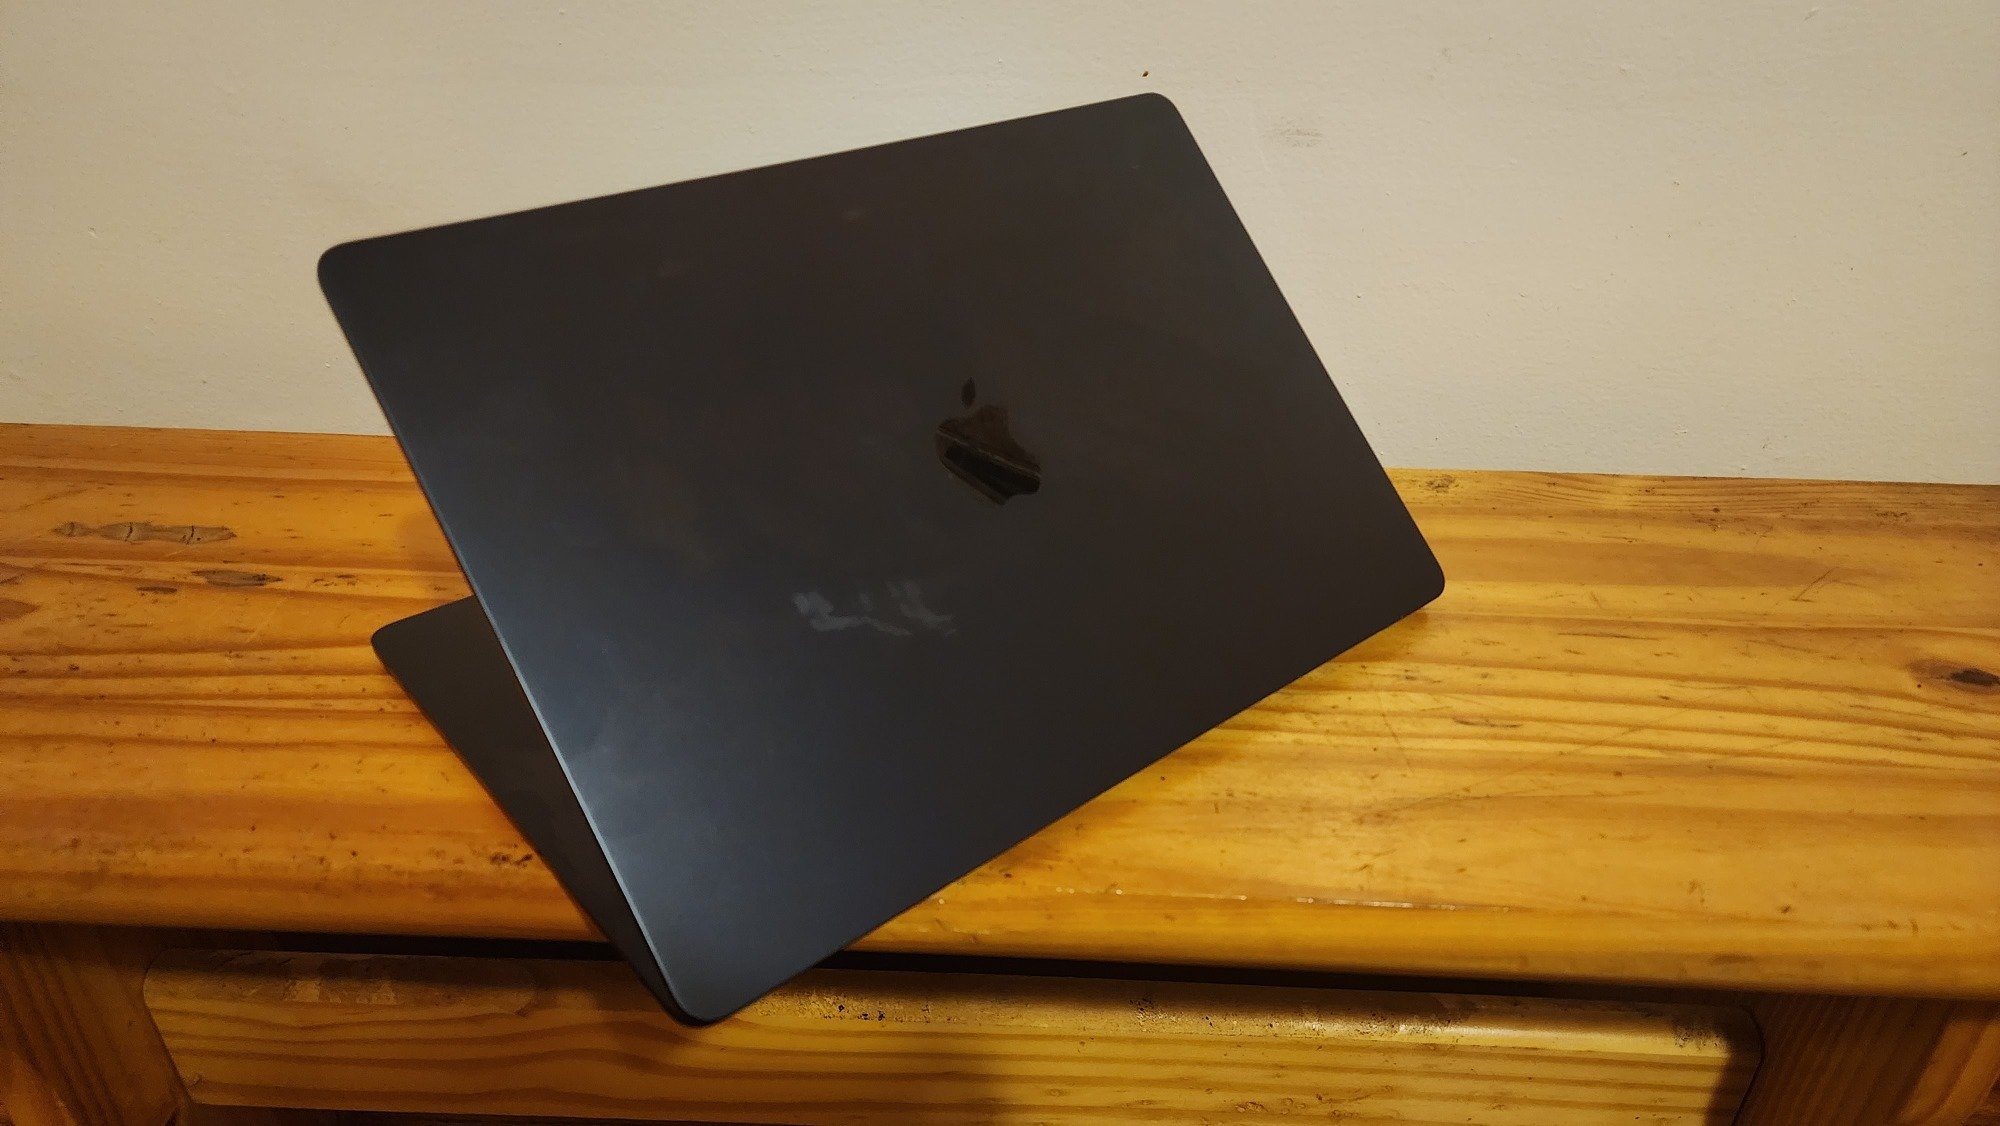 M2 MacBook Air 15-inch on a bench